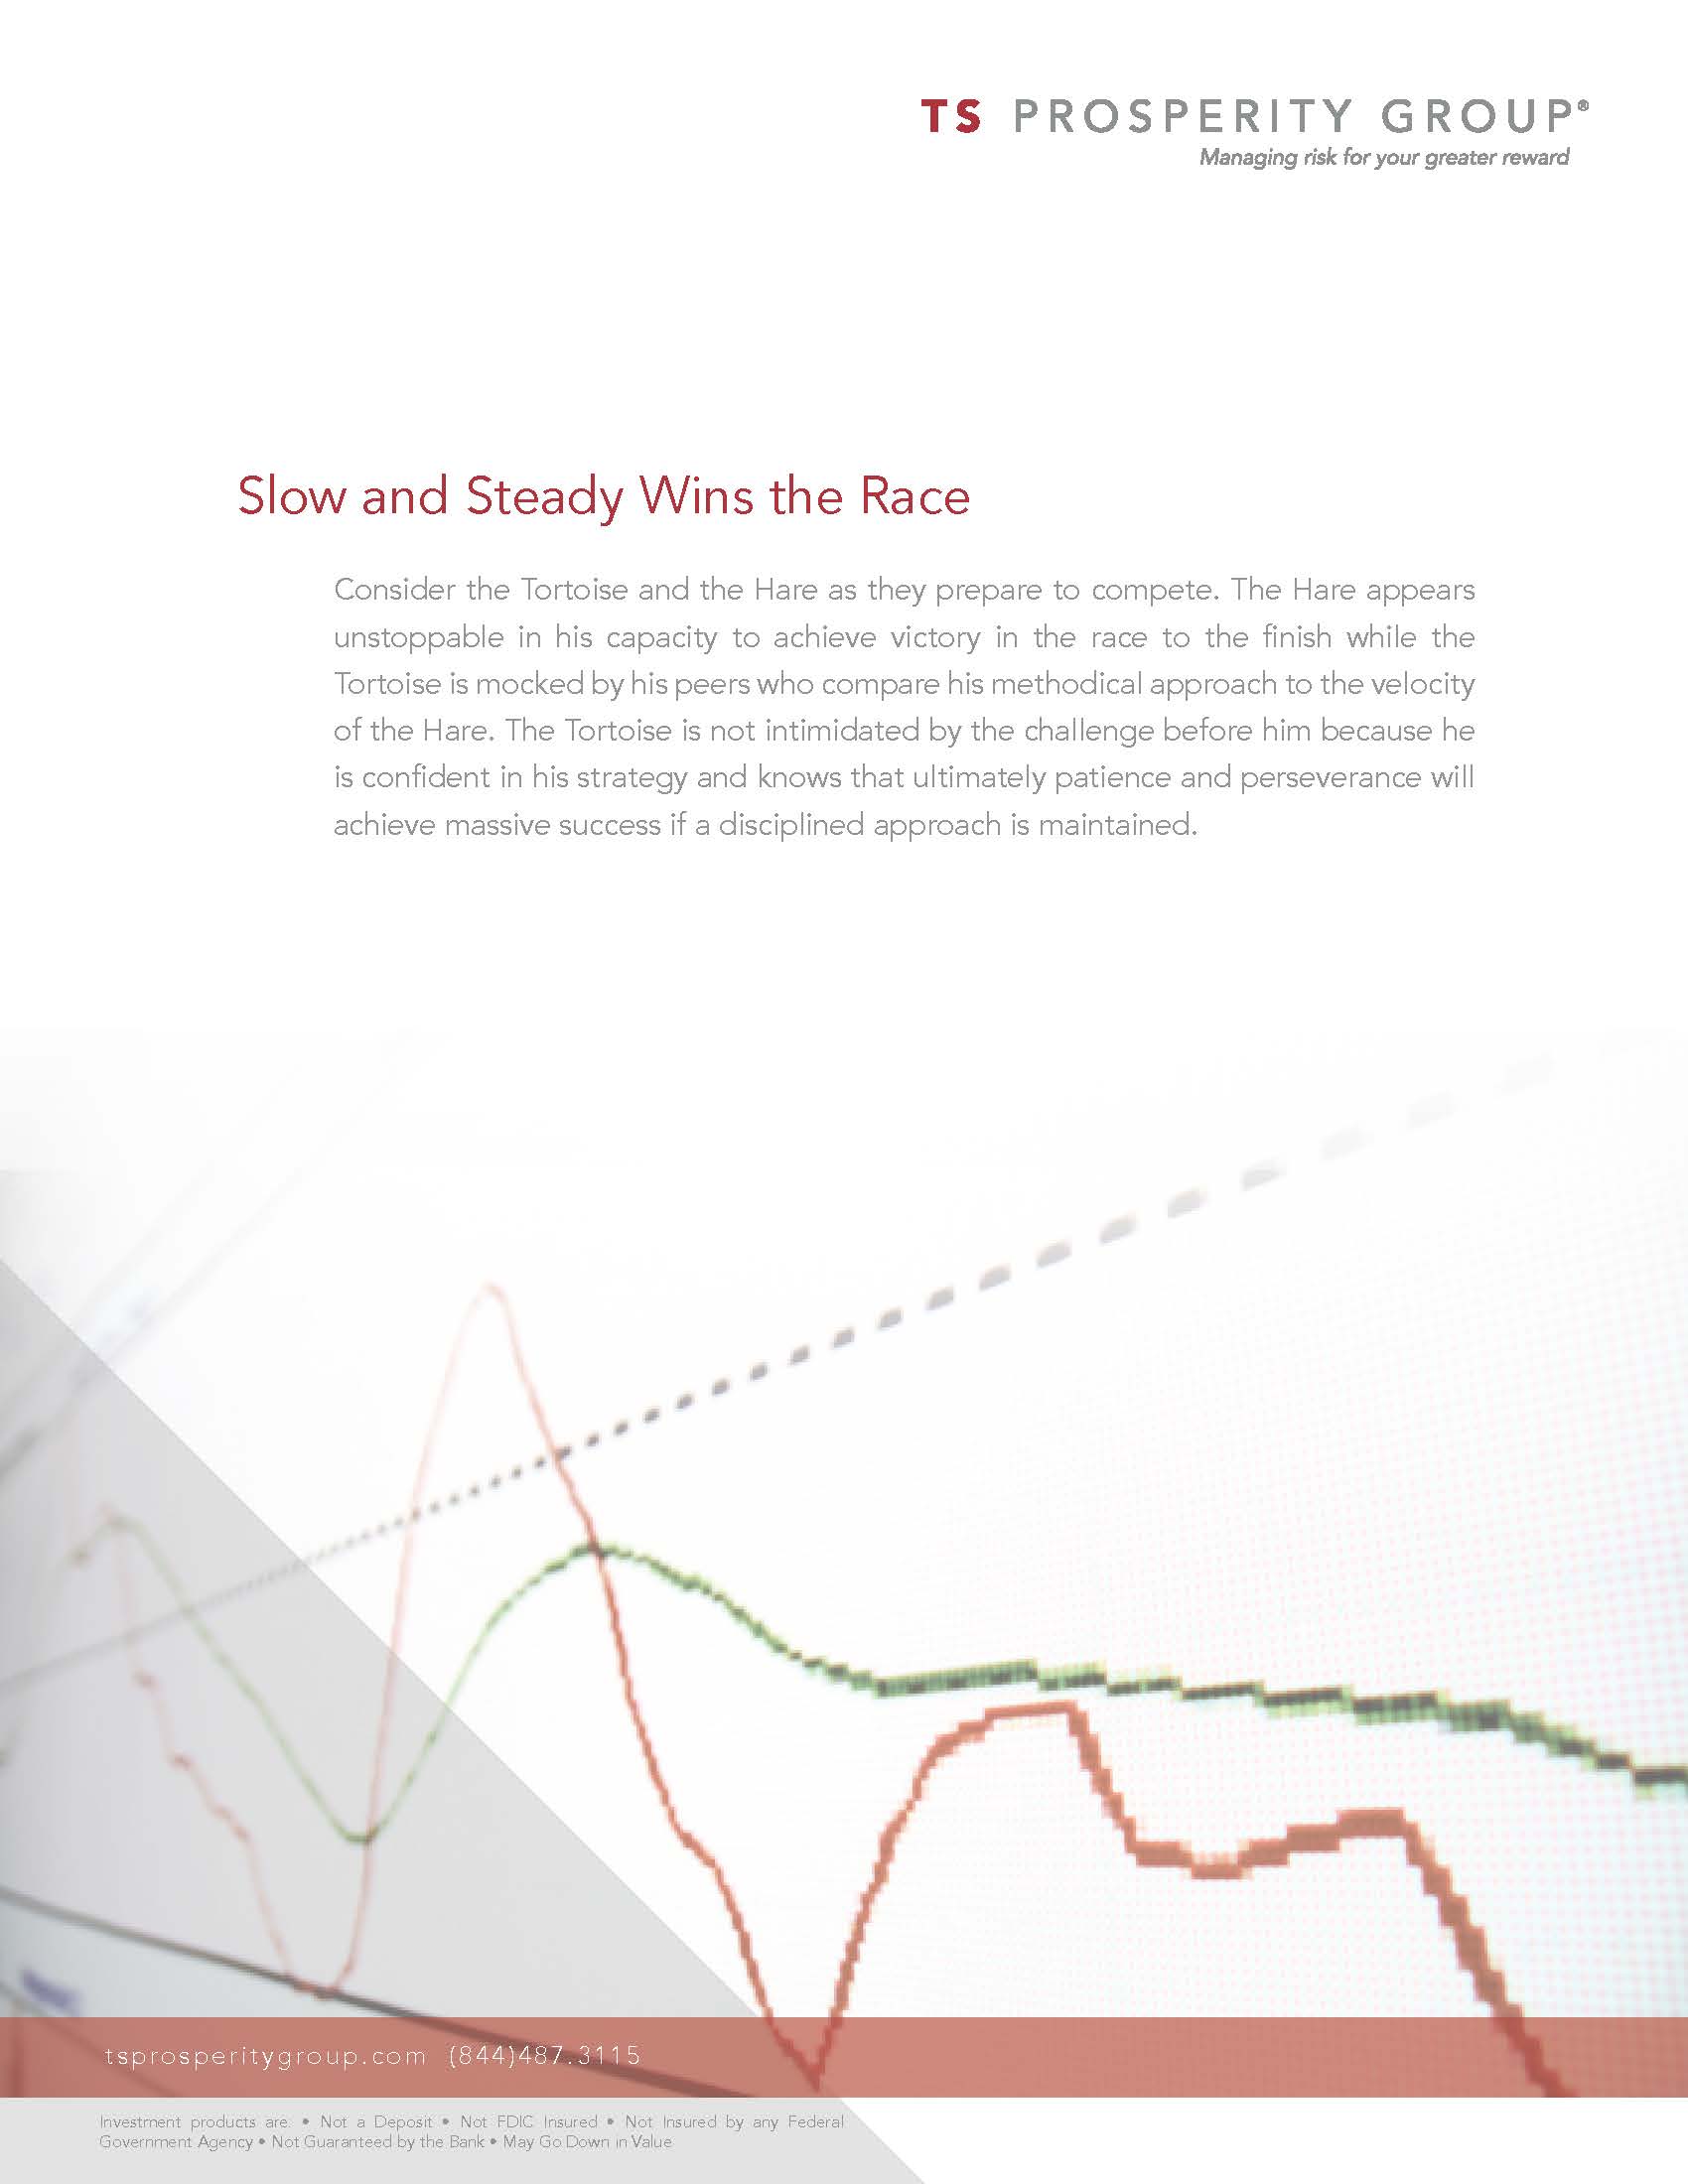 front cover of the slow and steady white paper